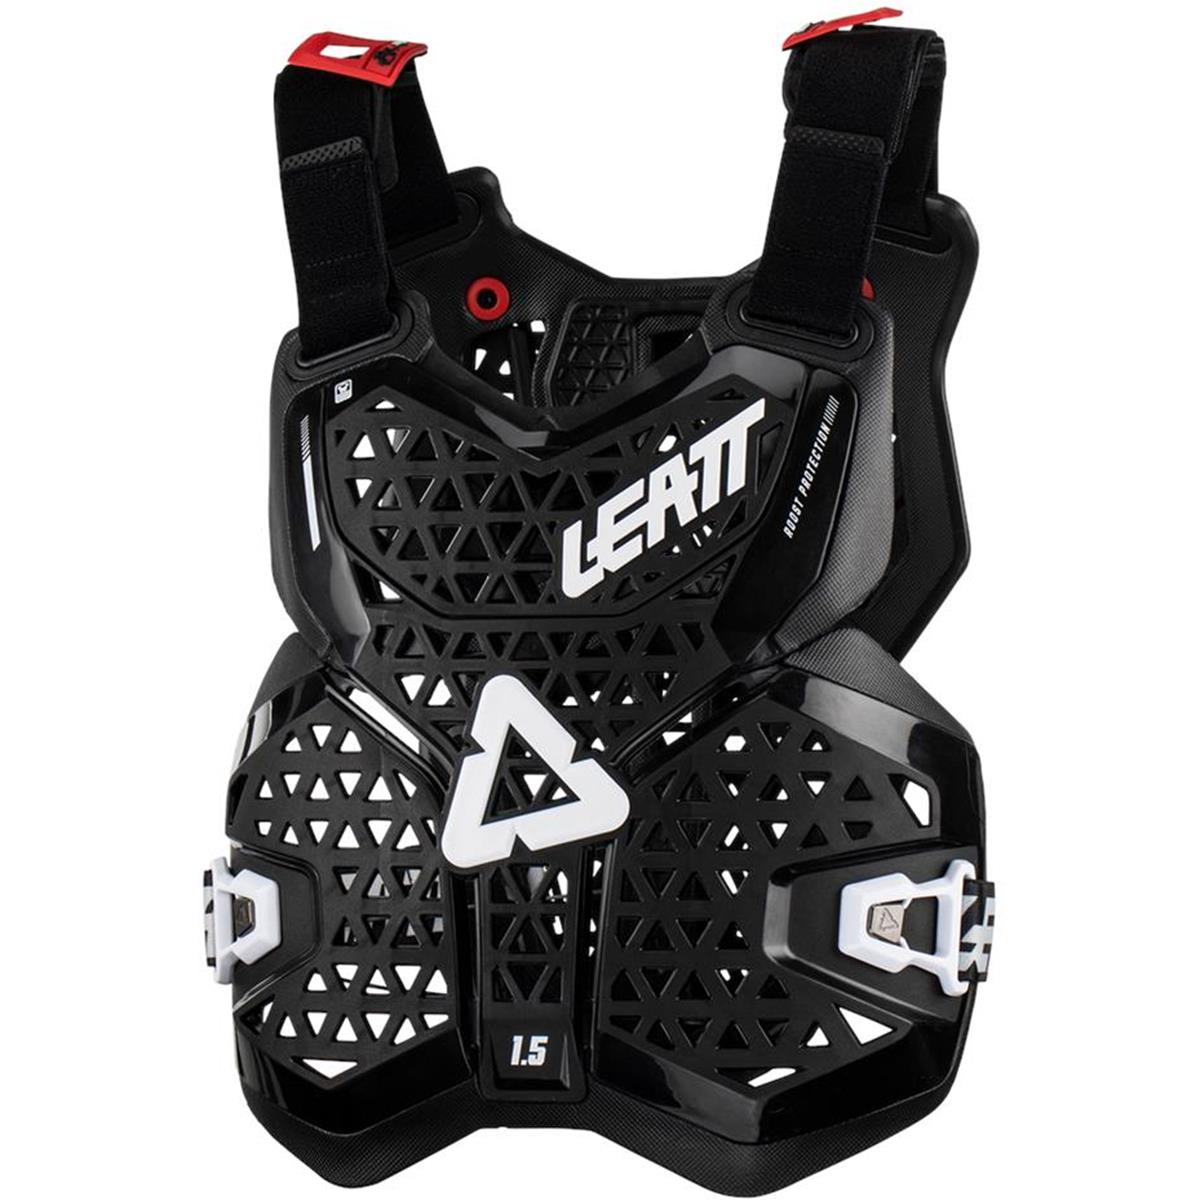 Leatt Chest Protector Chest Protector 1.5 Black